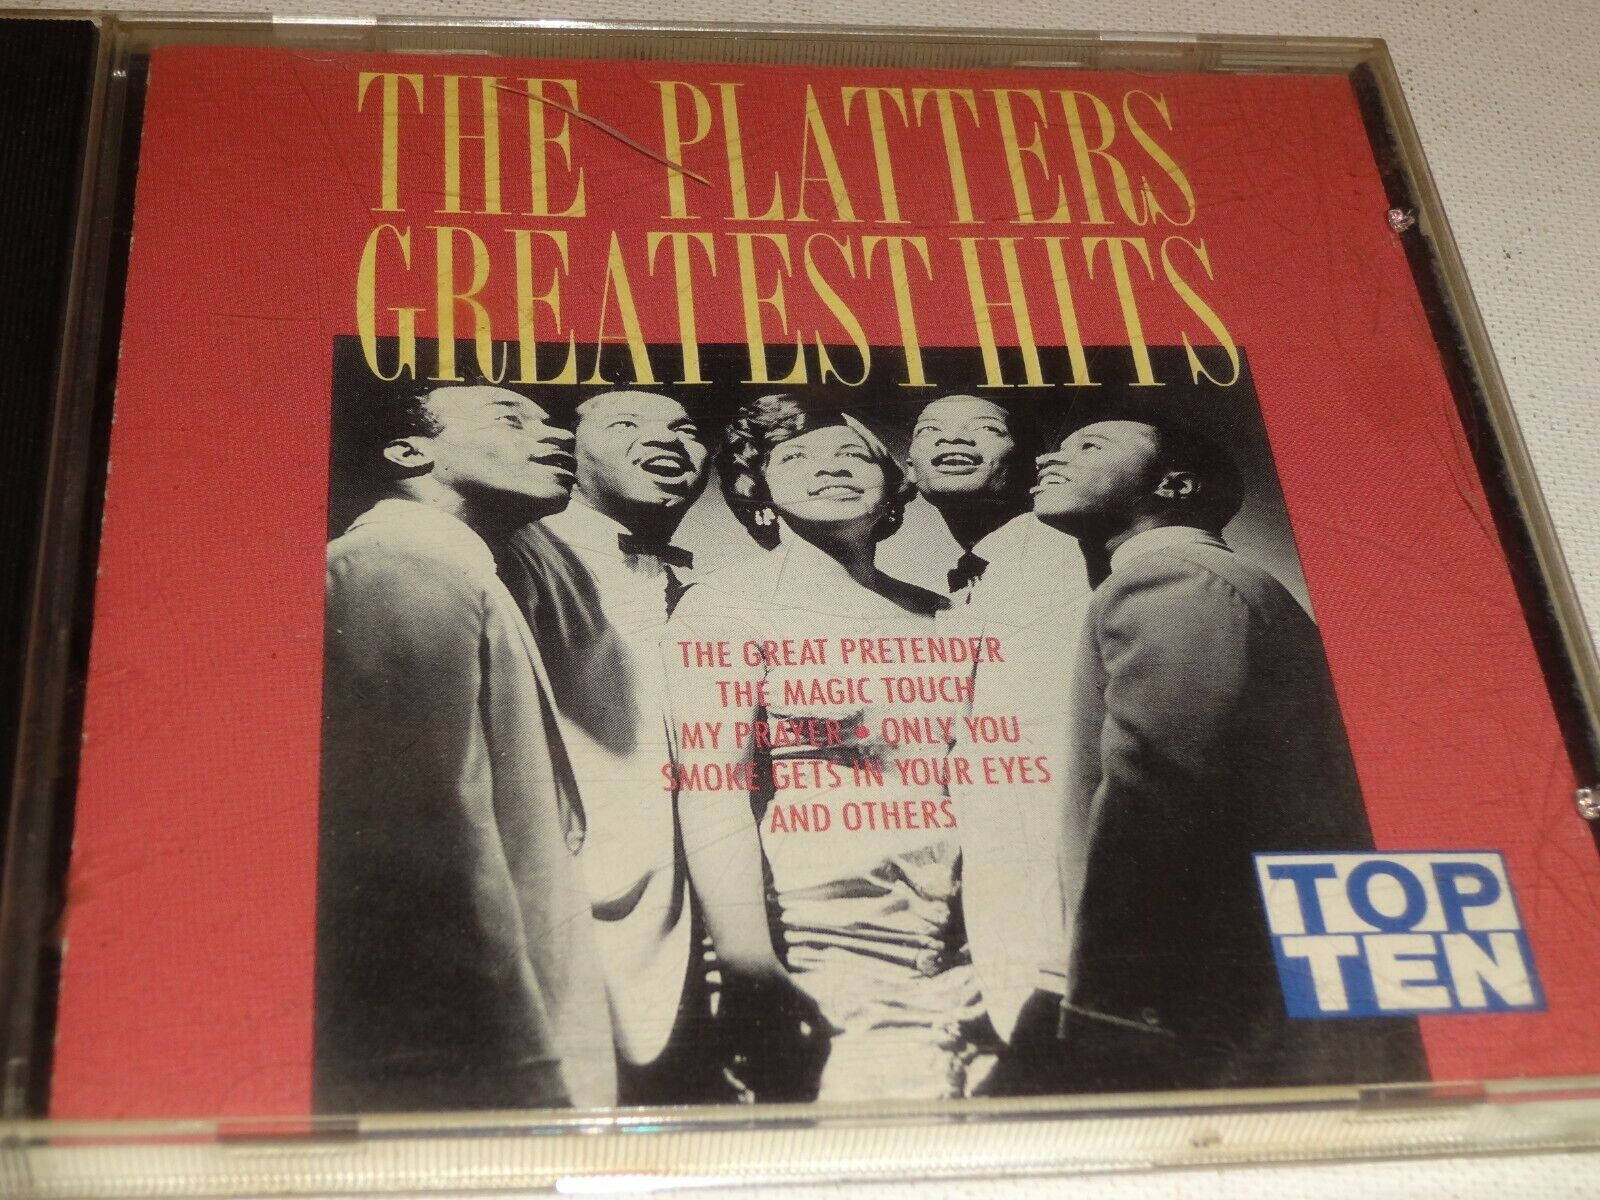 Platters Greatest Hits Cover Album Picture